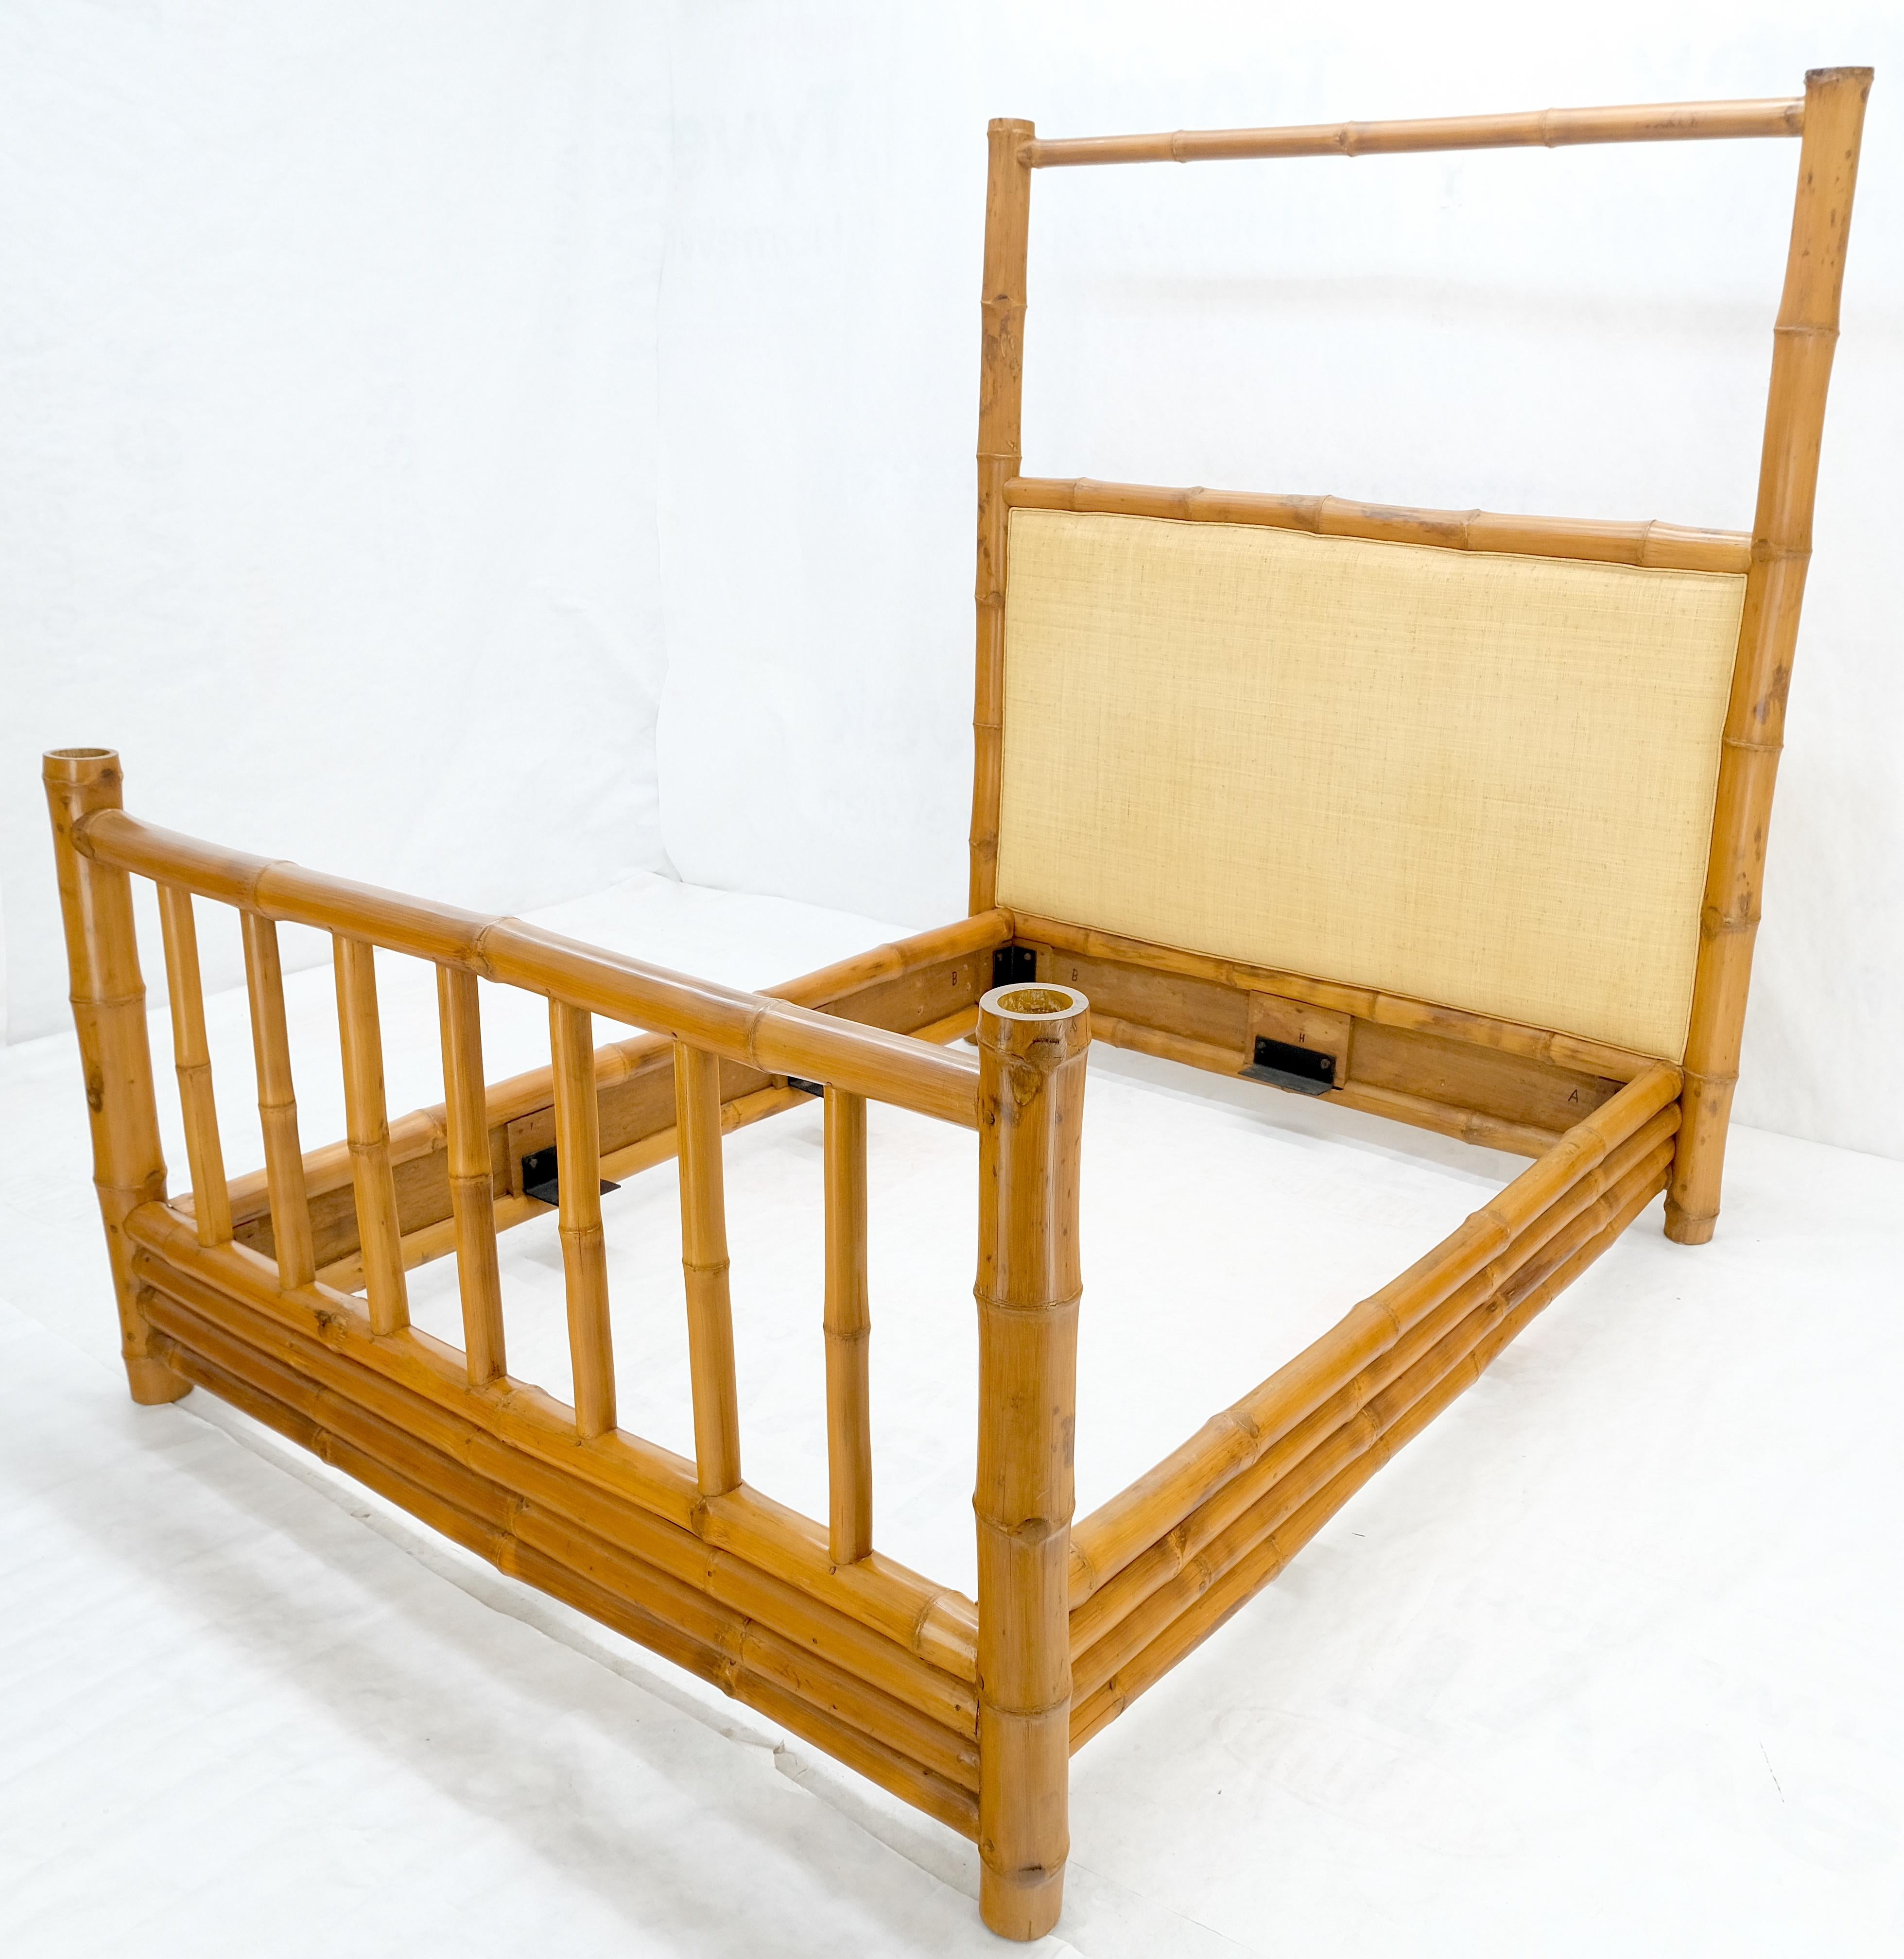 Lacquered Thick Bamboo Cane Upholstery King Size Poster Headboard Bed Footboard Rails MINT For Sale